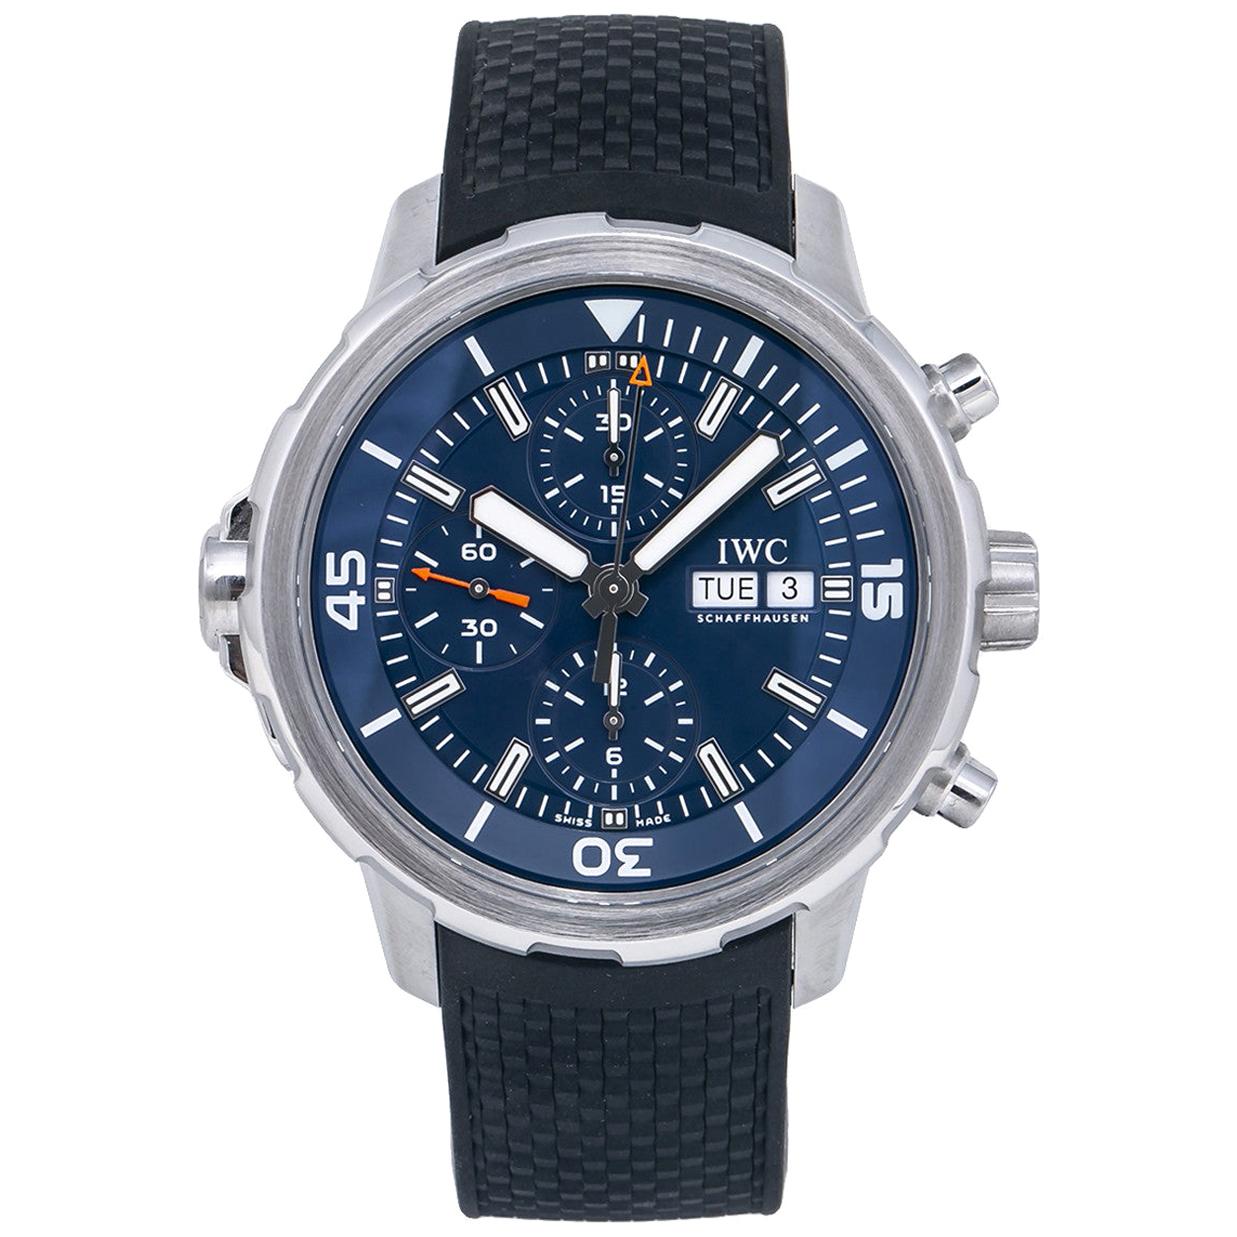 IWC Aquatimer IW376805 Chronograph Limited Edition Expedition Blue Dial Watch For Sale